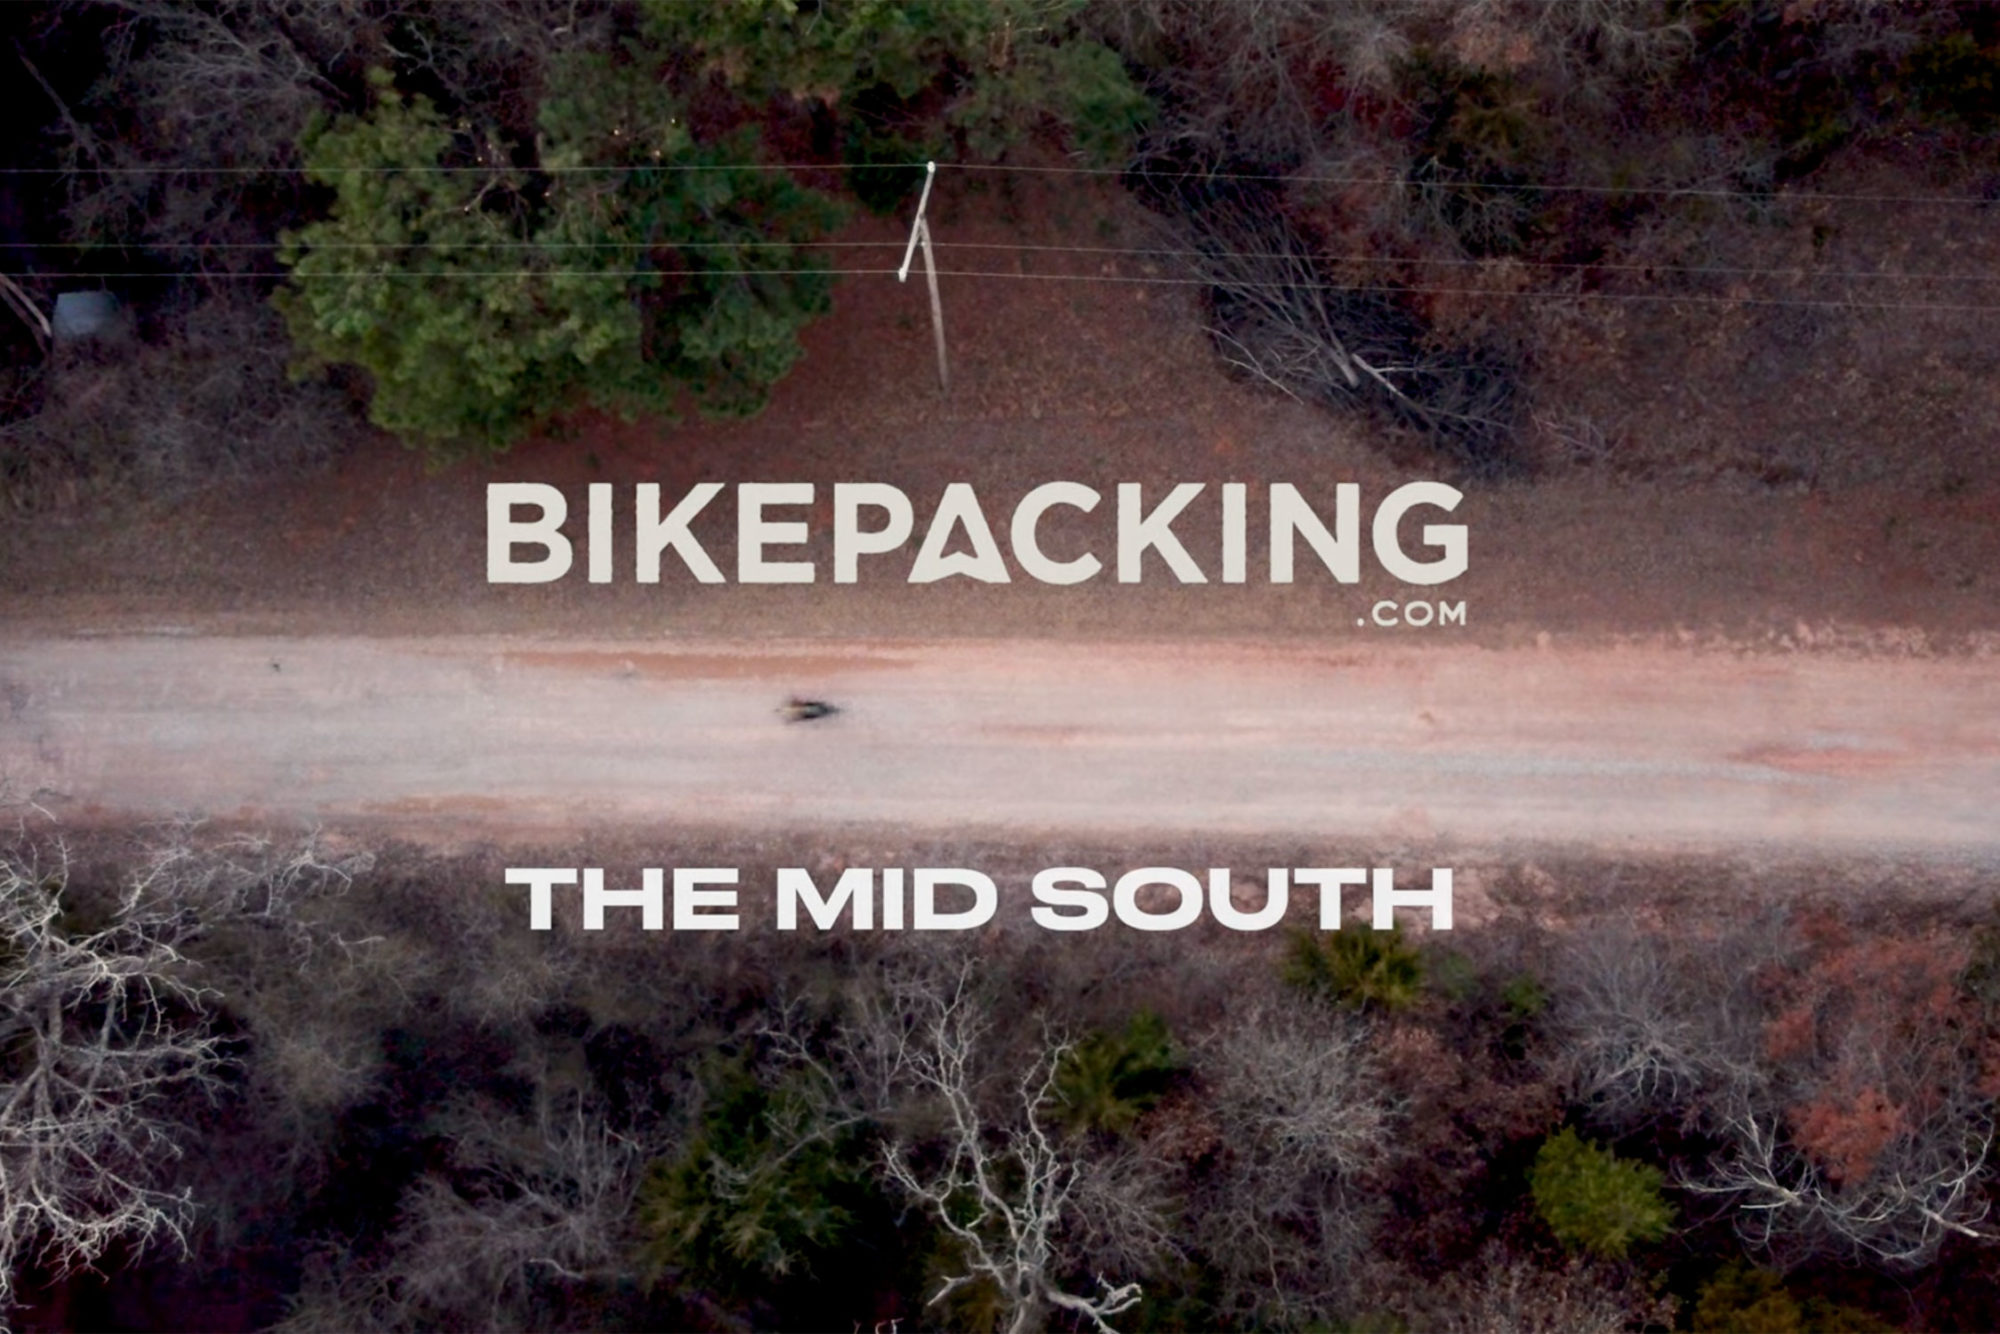 Bikepacking The Mid South